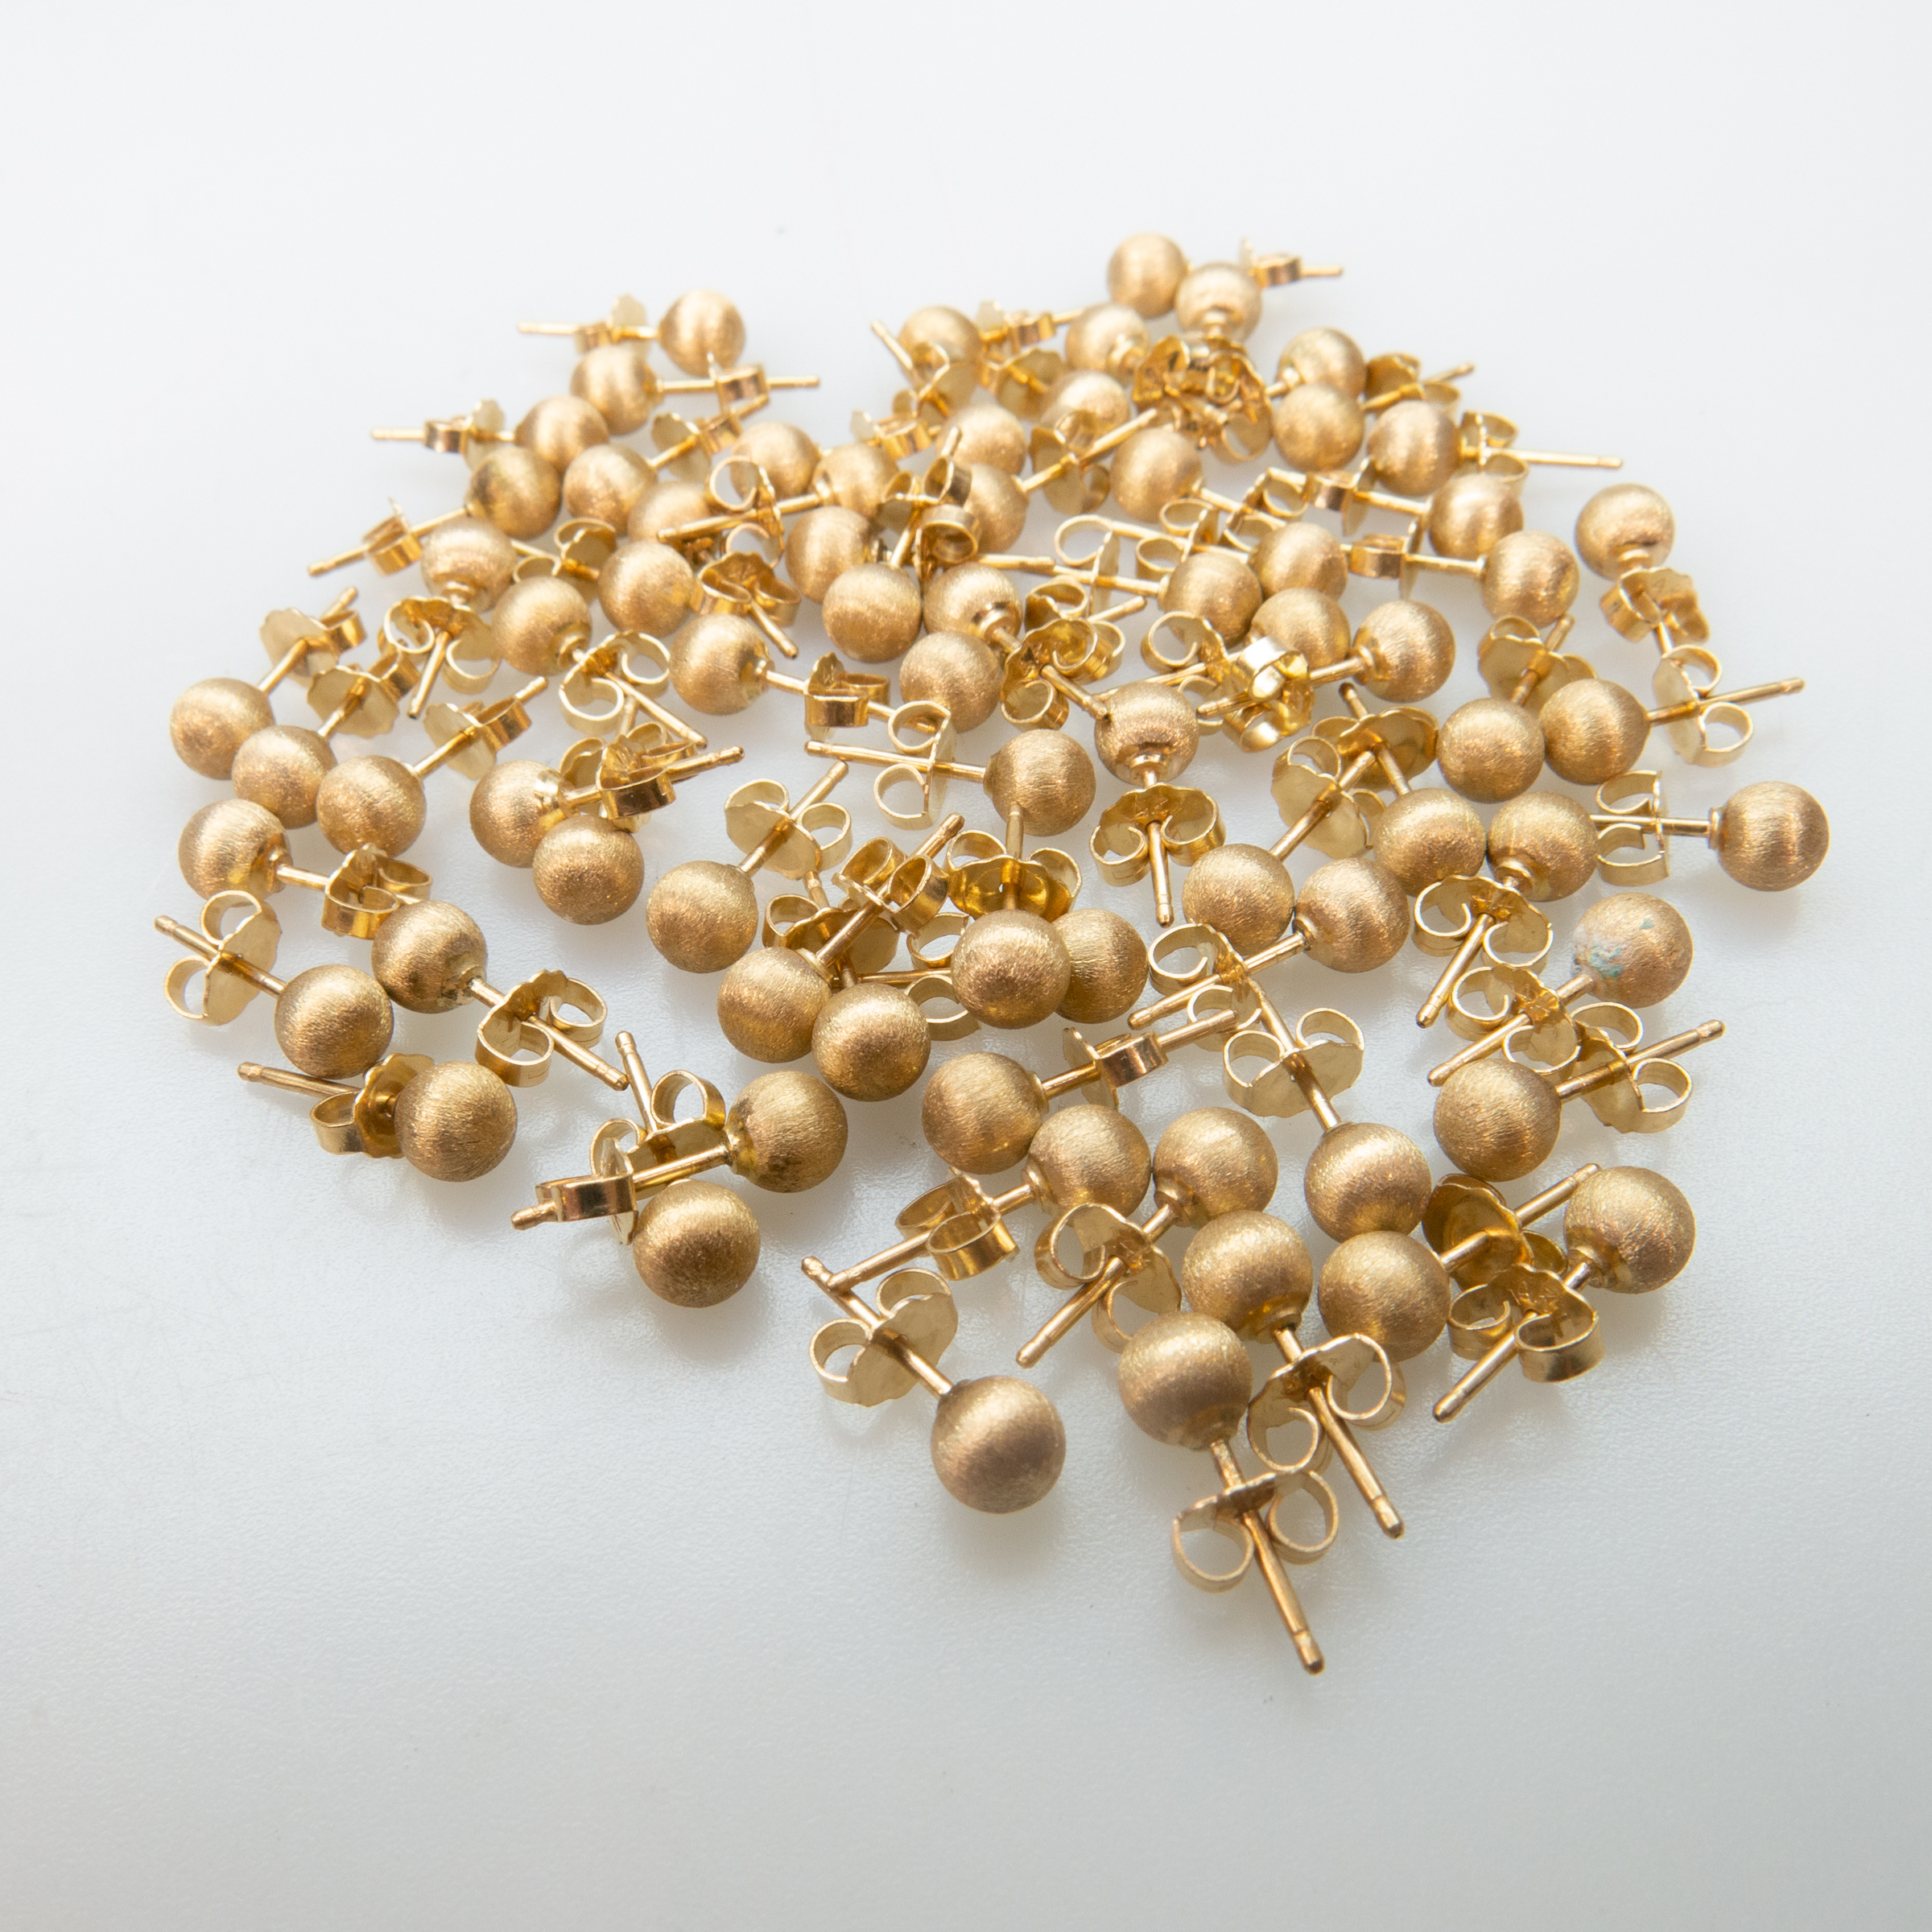 35 x Pairs Of 14k Yellow Gold Stud Earrings